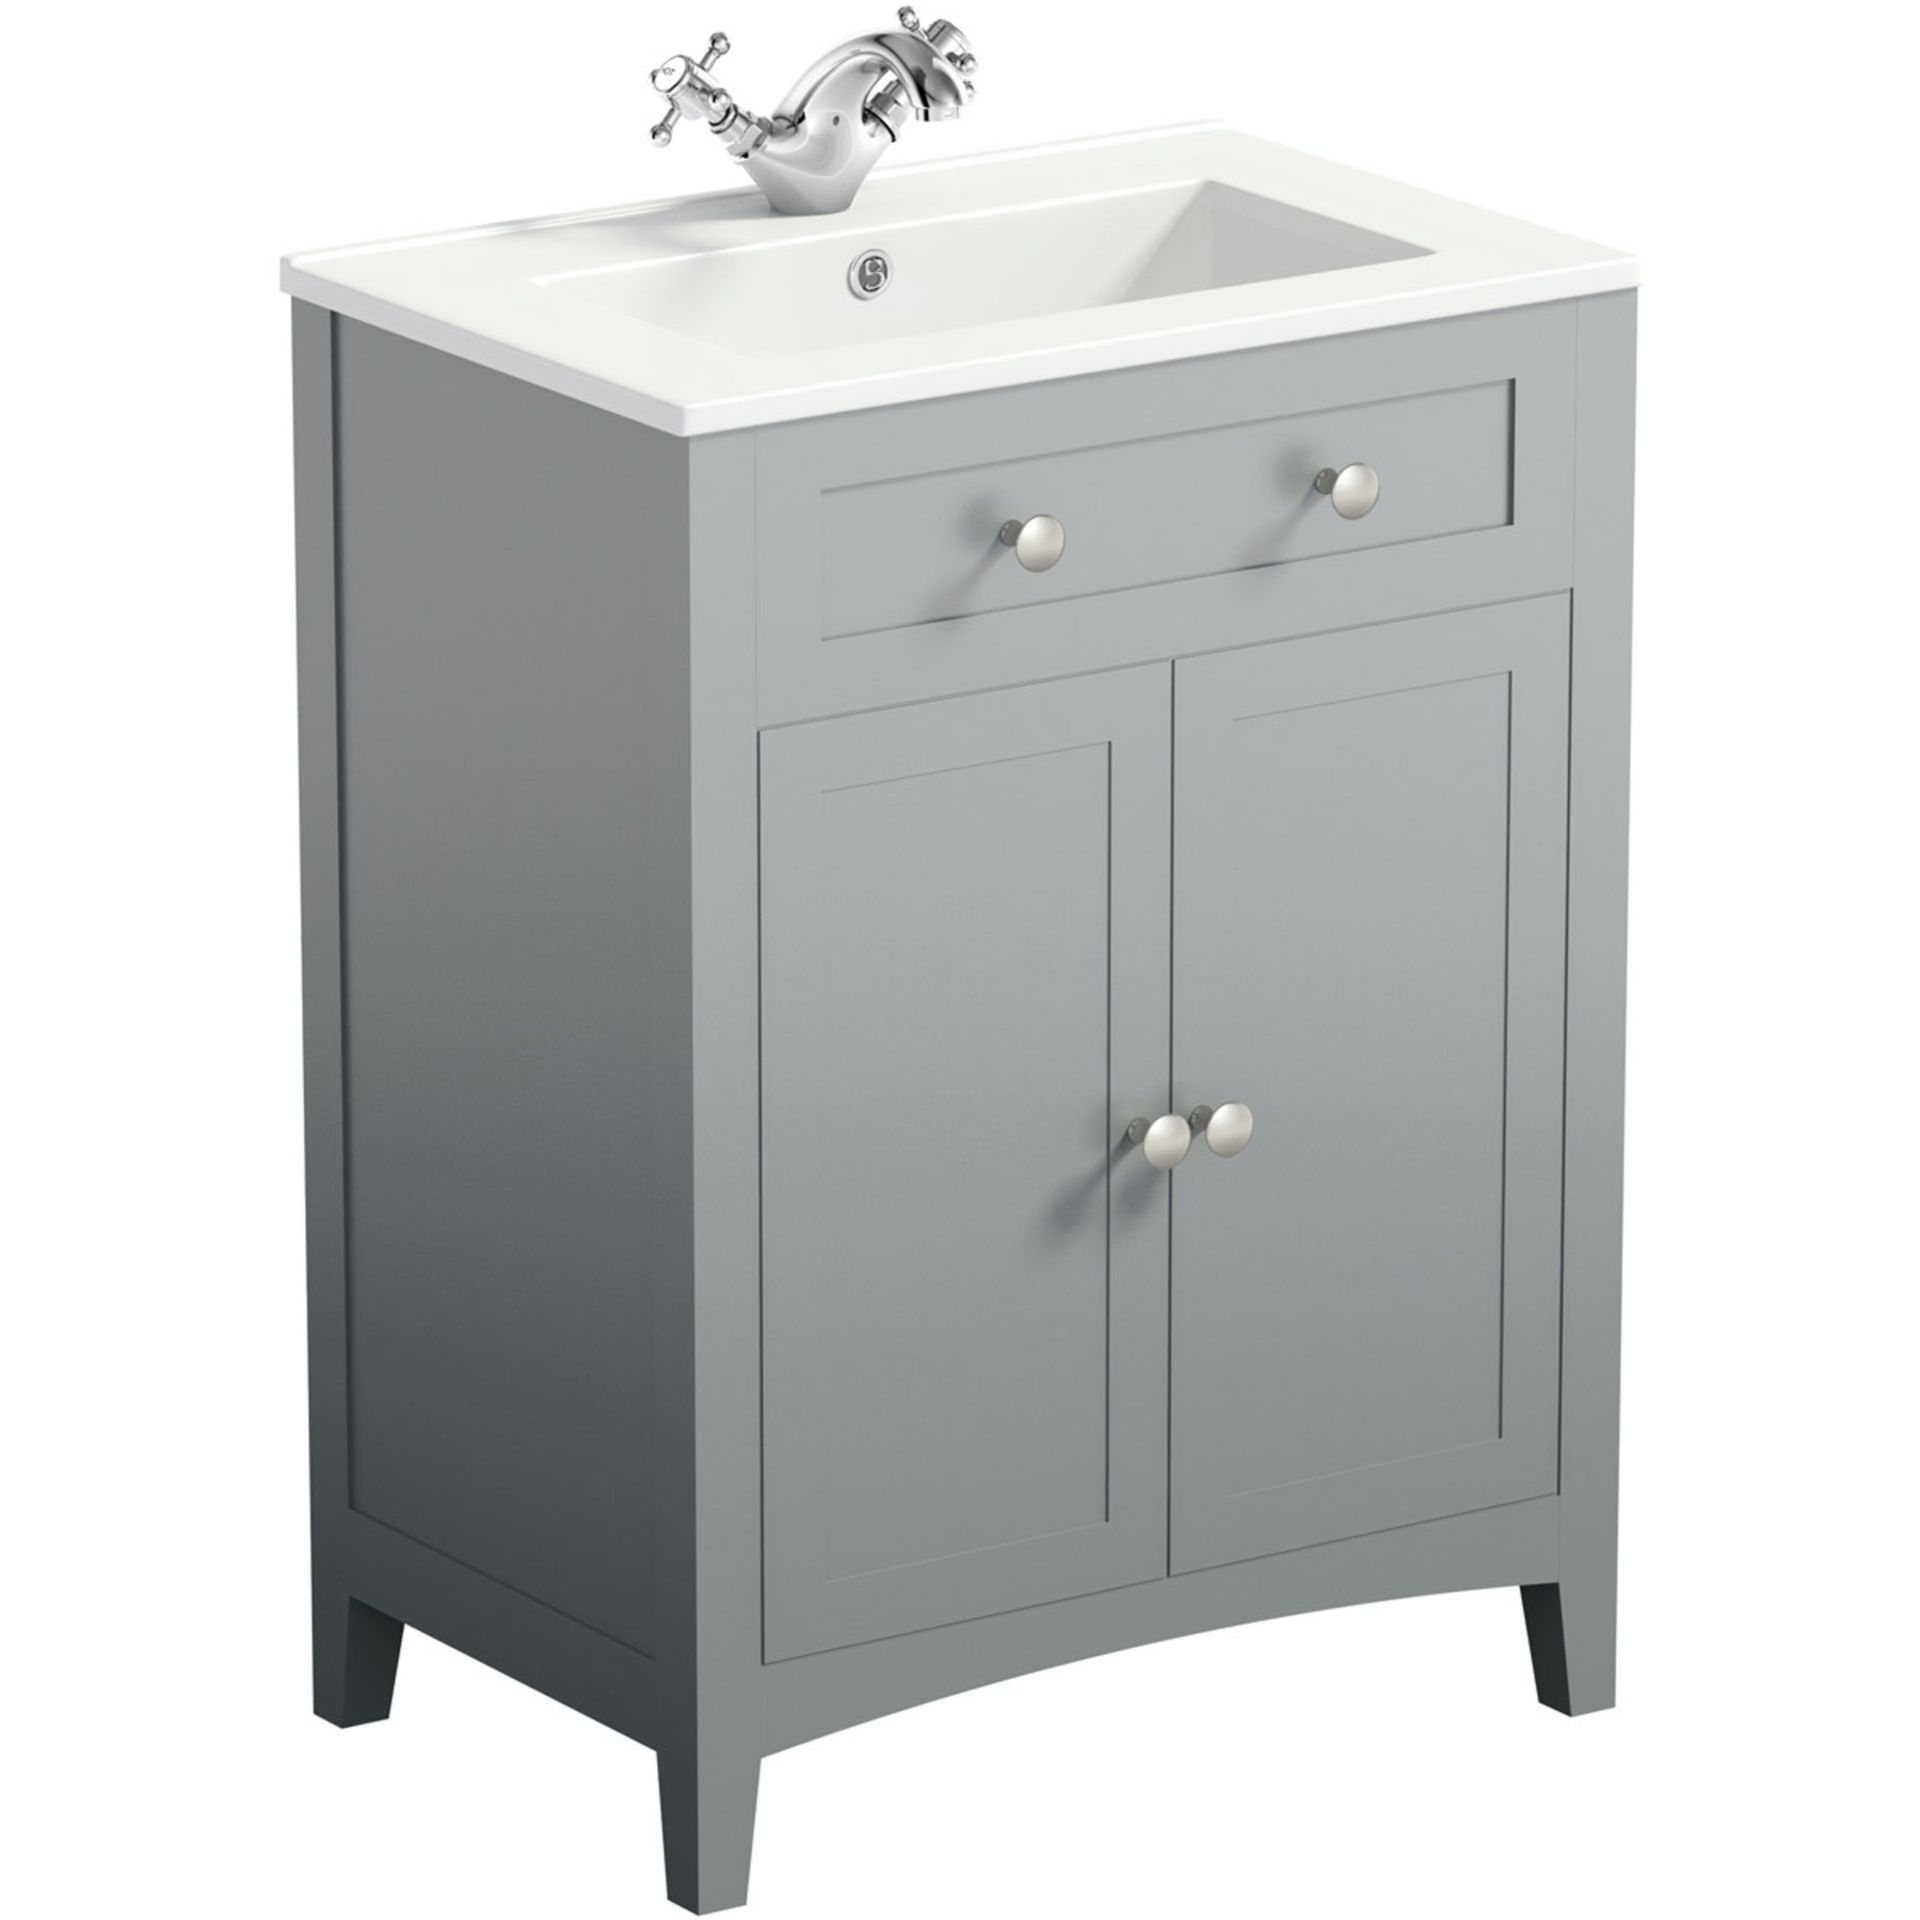 Pallet of bathroom stock to include - Camberley satin grey vanity unit, Straight bath front panel